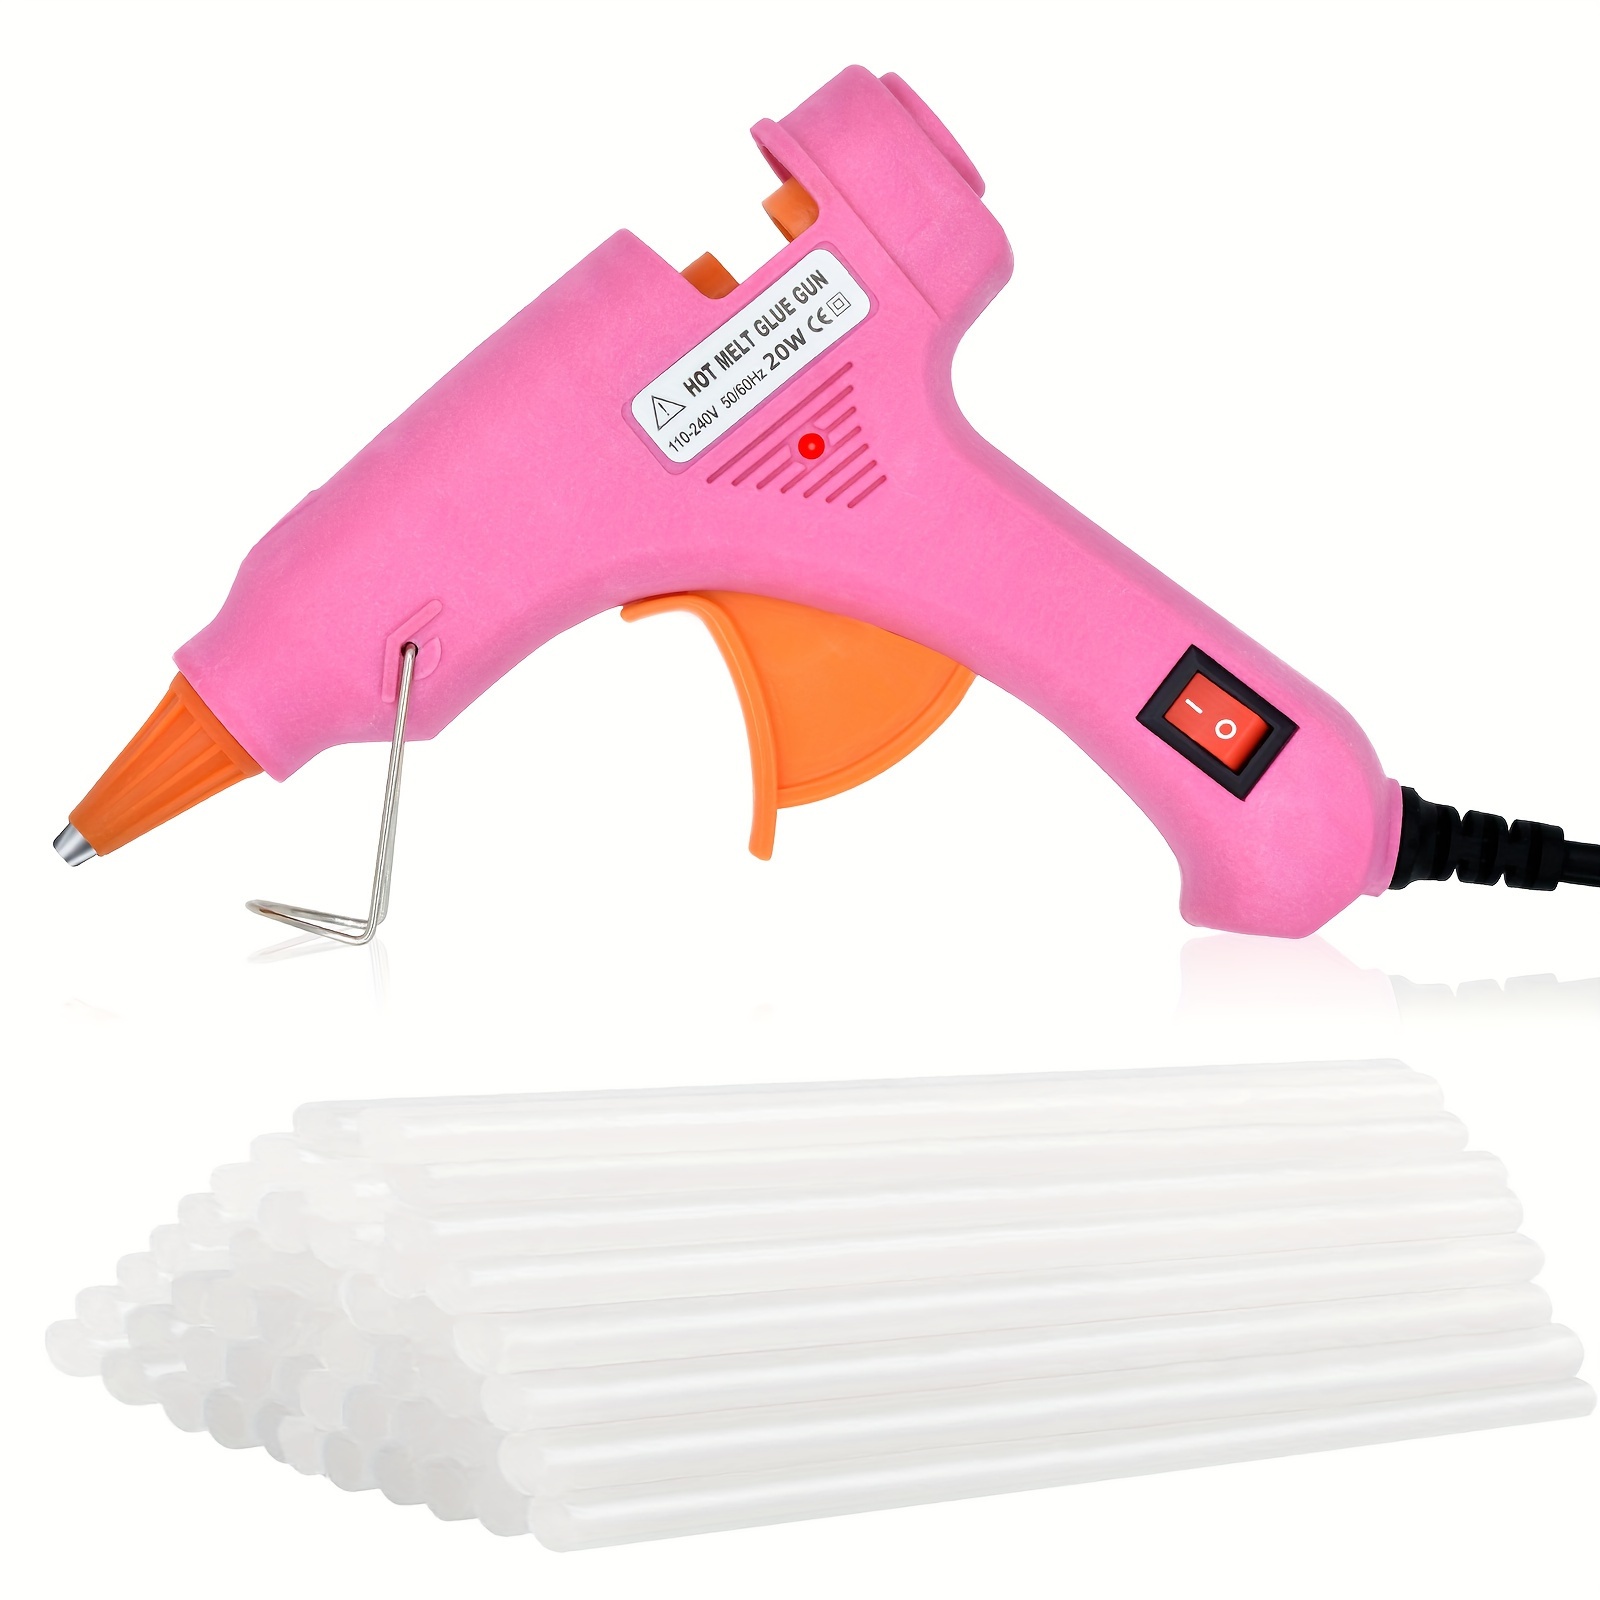  1 set 20W Hot Melt Glue Gun With Glues Stick Industrial Craft  Mini Guns Thermo Electric Heat Temperature Tool For DIY Jewelry Making  (White-US) : Arts, Crafts & Sewing